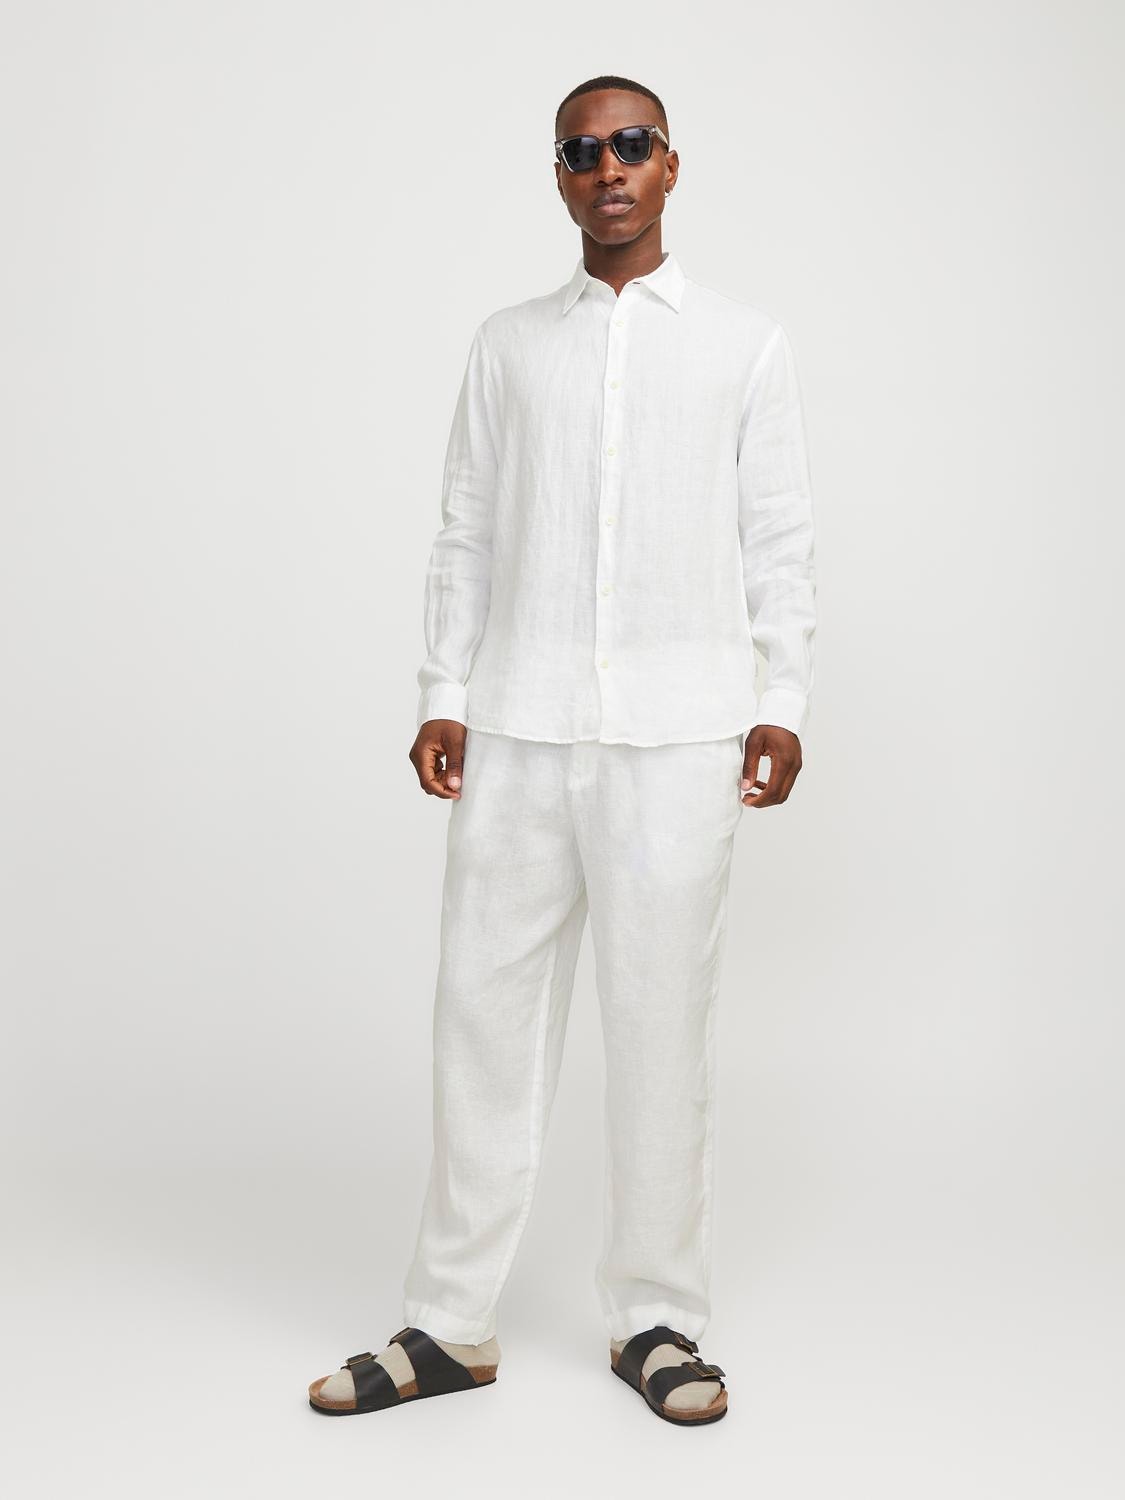 Jack & Jones Relaxed Fit Ing -Bright White - 12251844